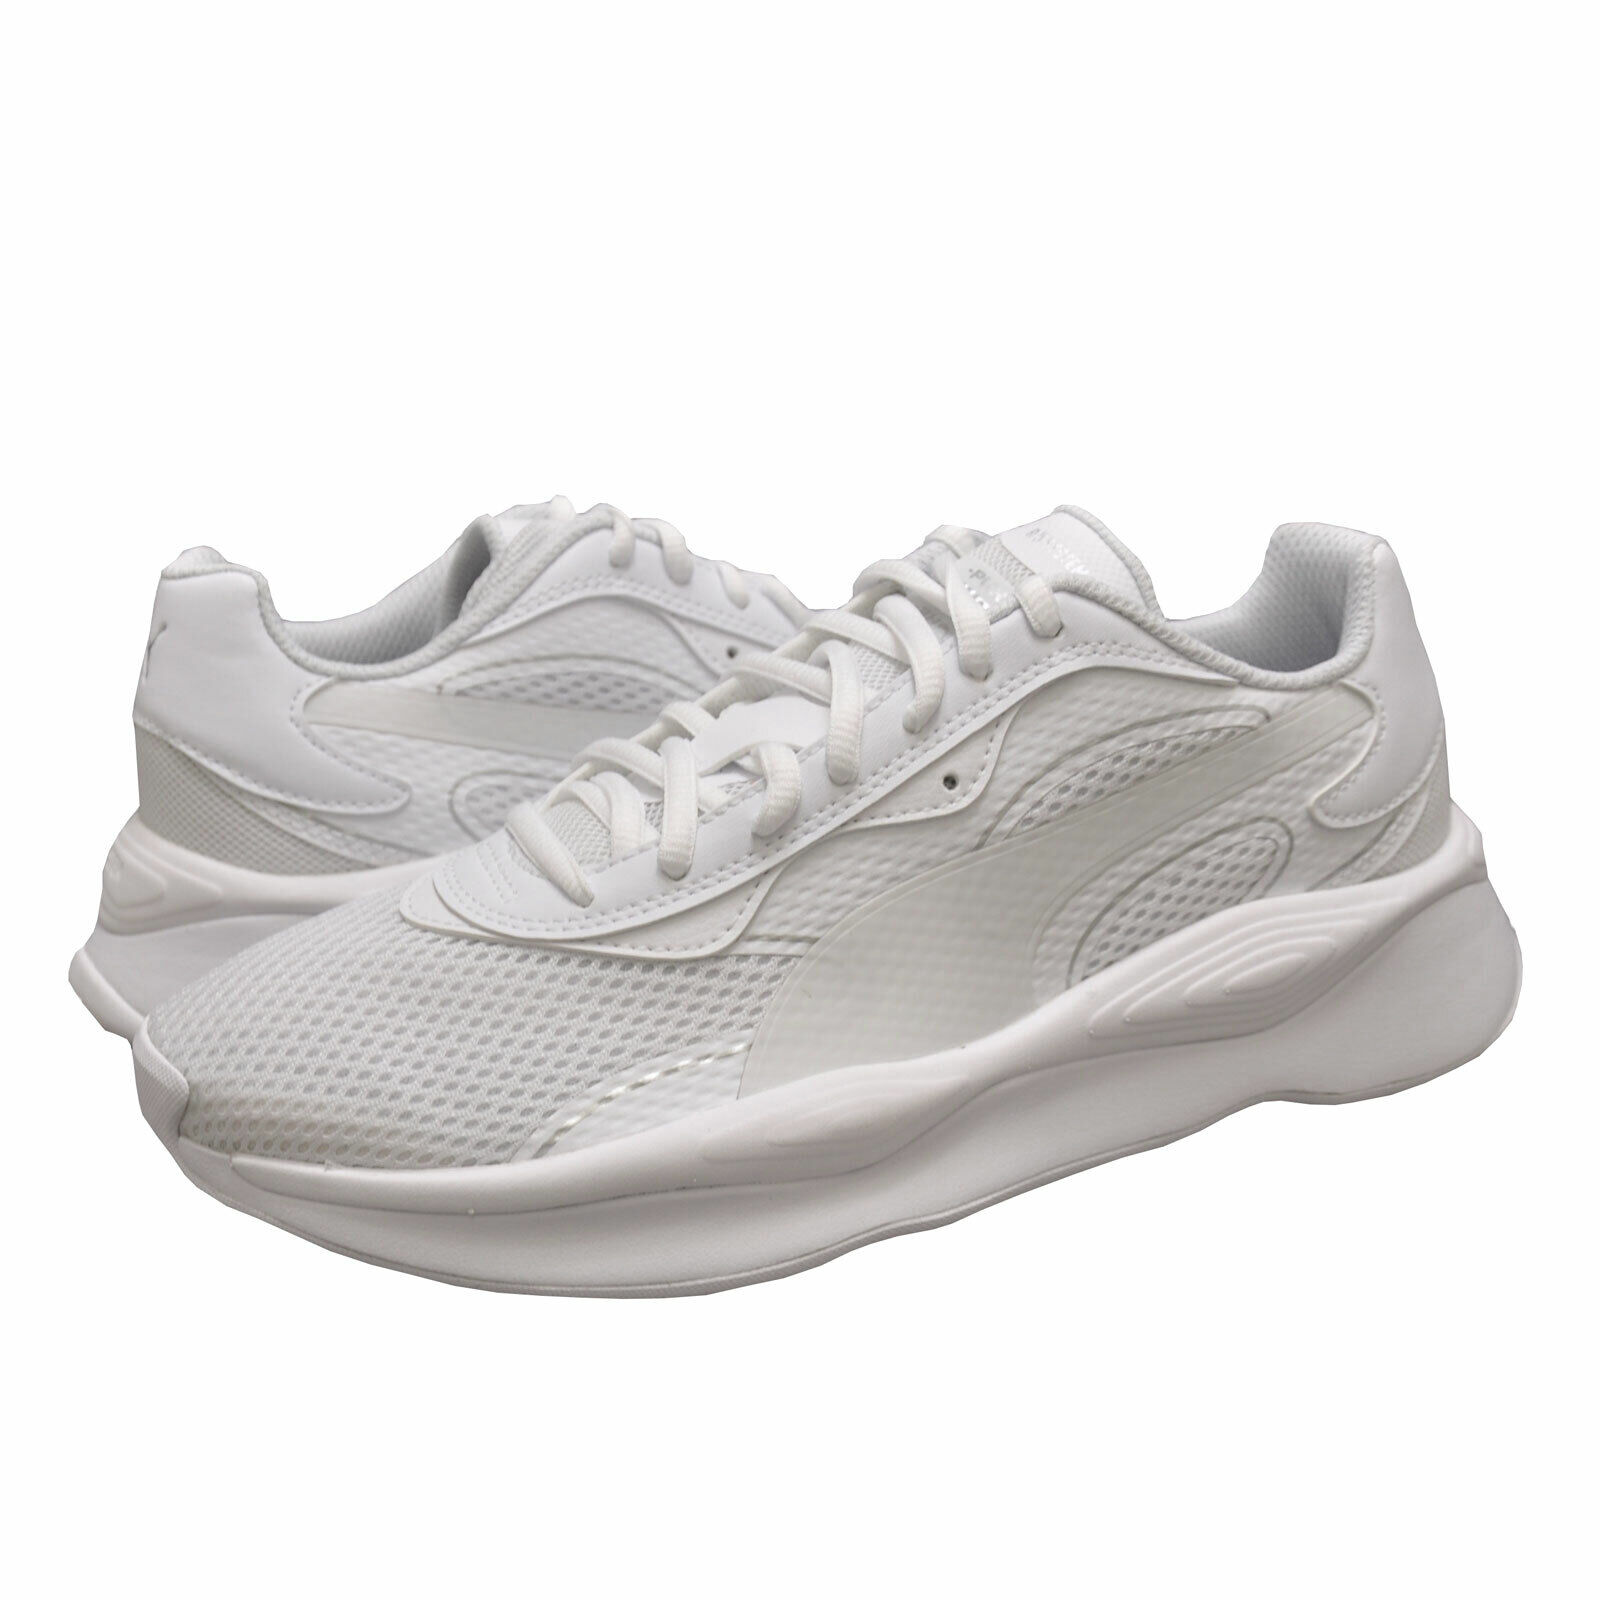 Men's Shoes PUMA RS-PURE BASE Casual Athletic Train Sneakers 372251-01 WHITE